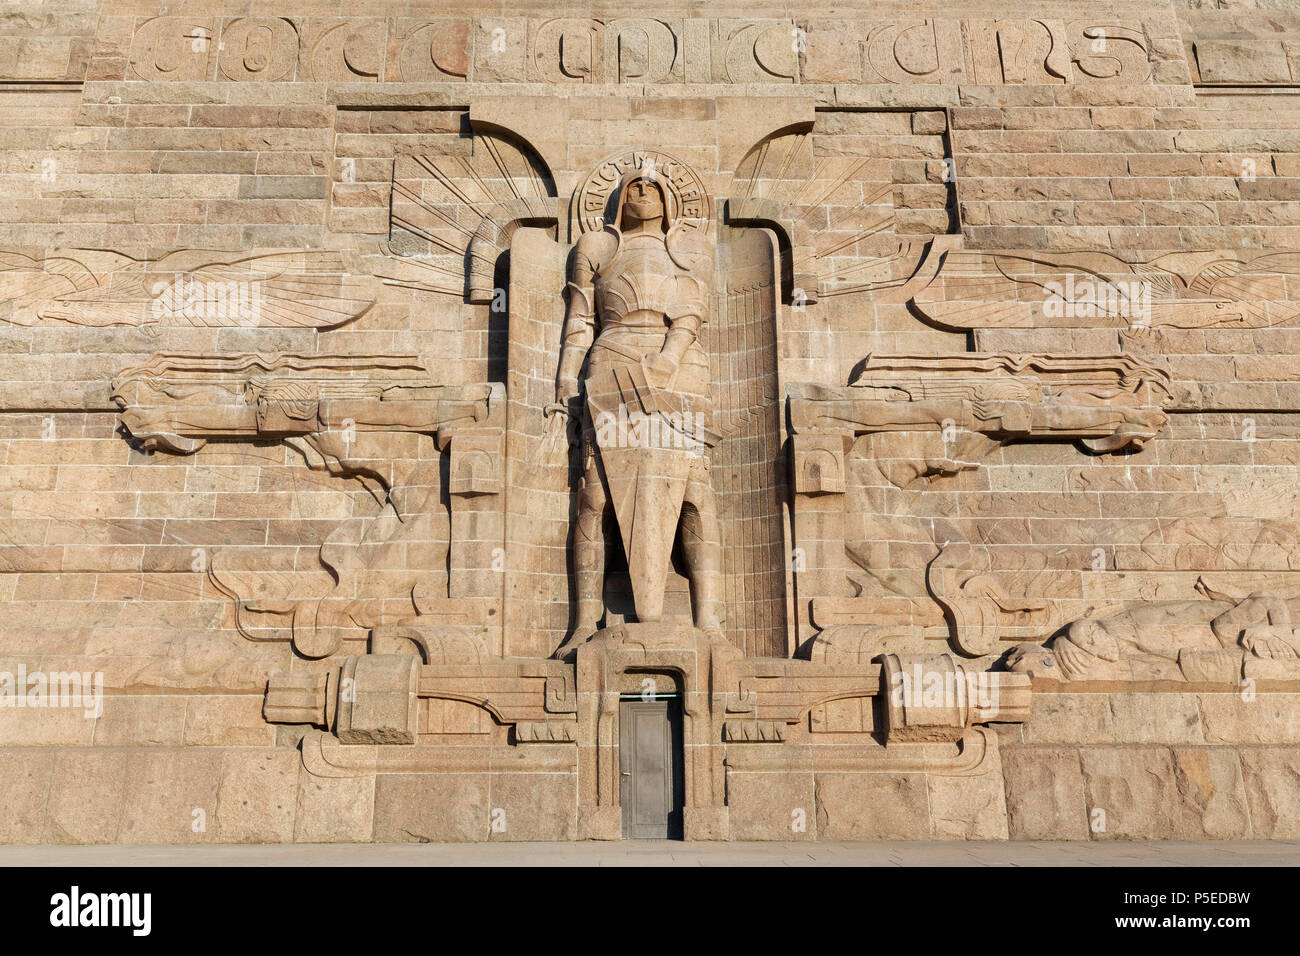 Relief God with us and figure St. Michael, Monument to the Battle of the Nations, Leipzig, Saxony, Germany Stock Photo